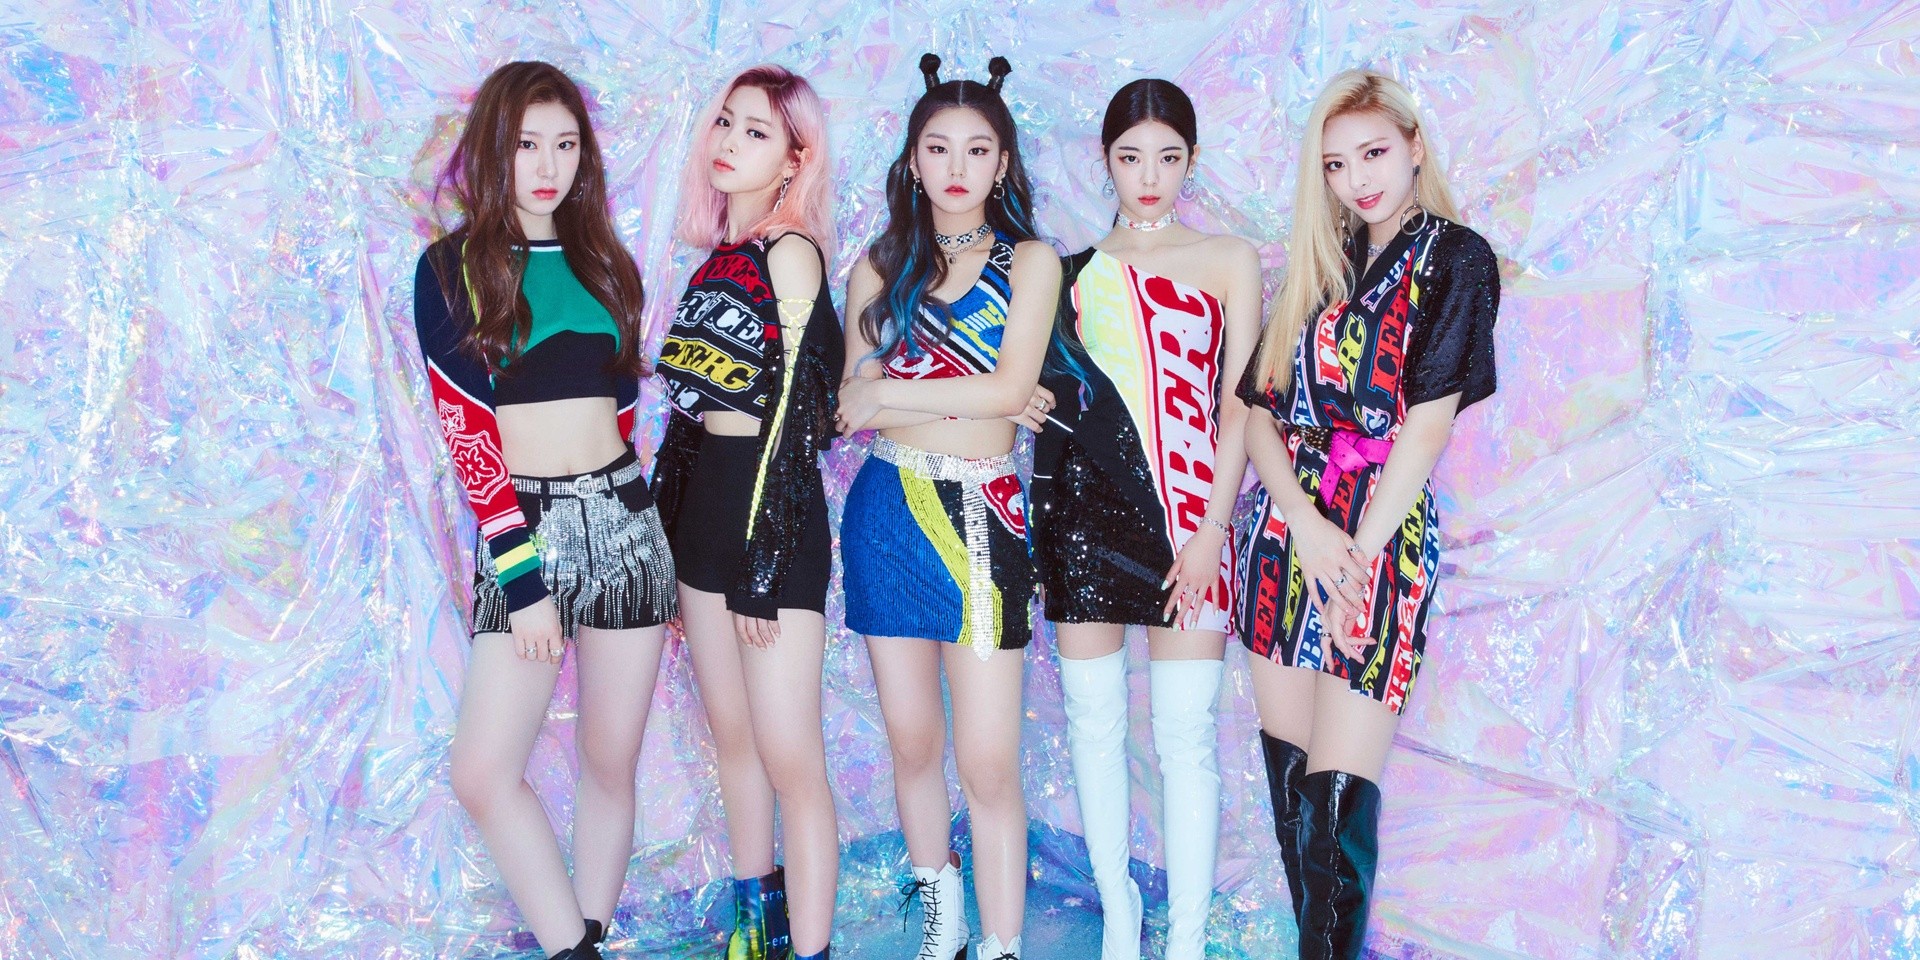 ITZY will arrive in Singapore this December for its debut showcase